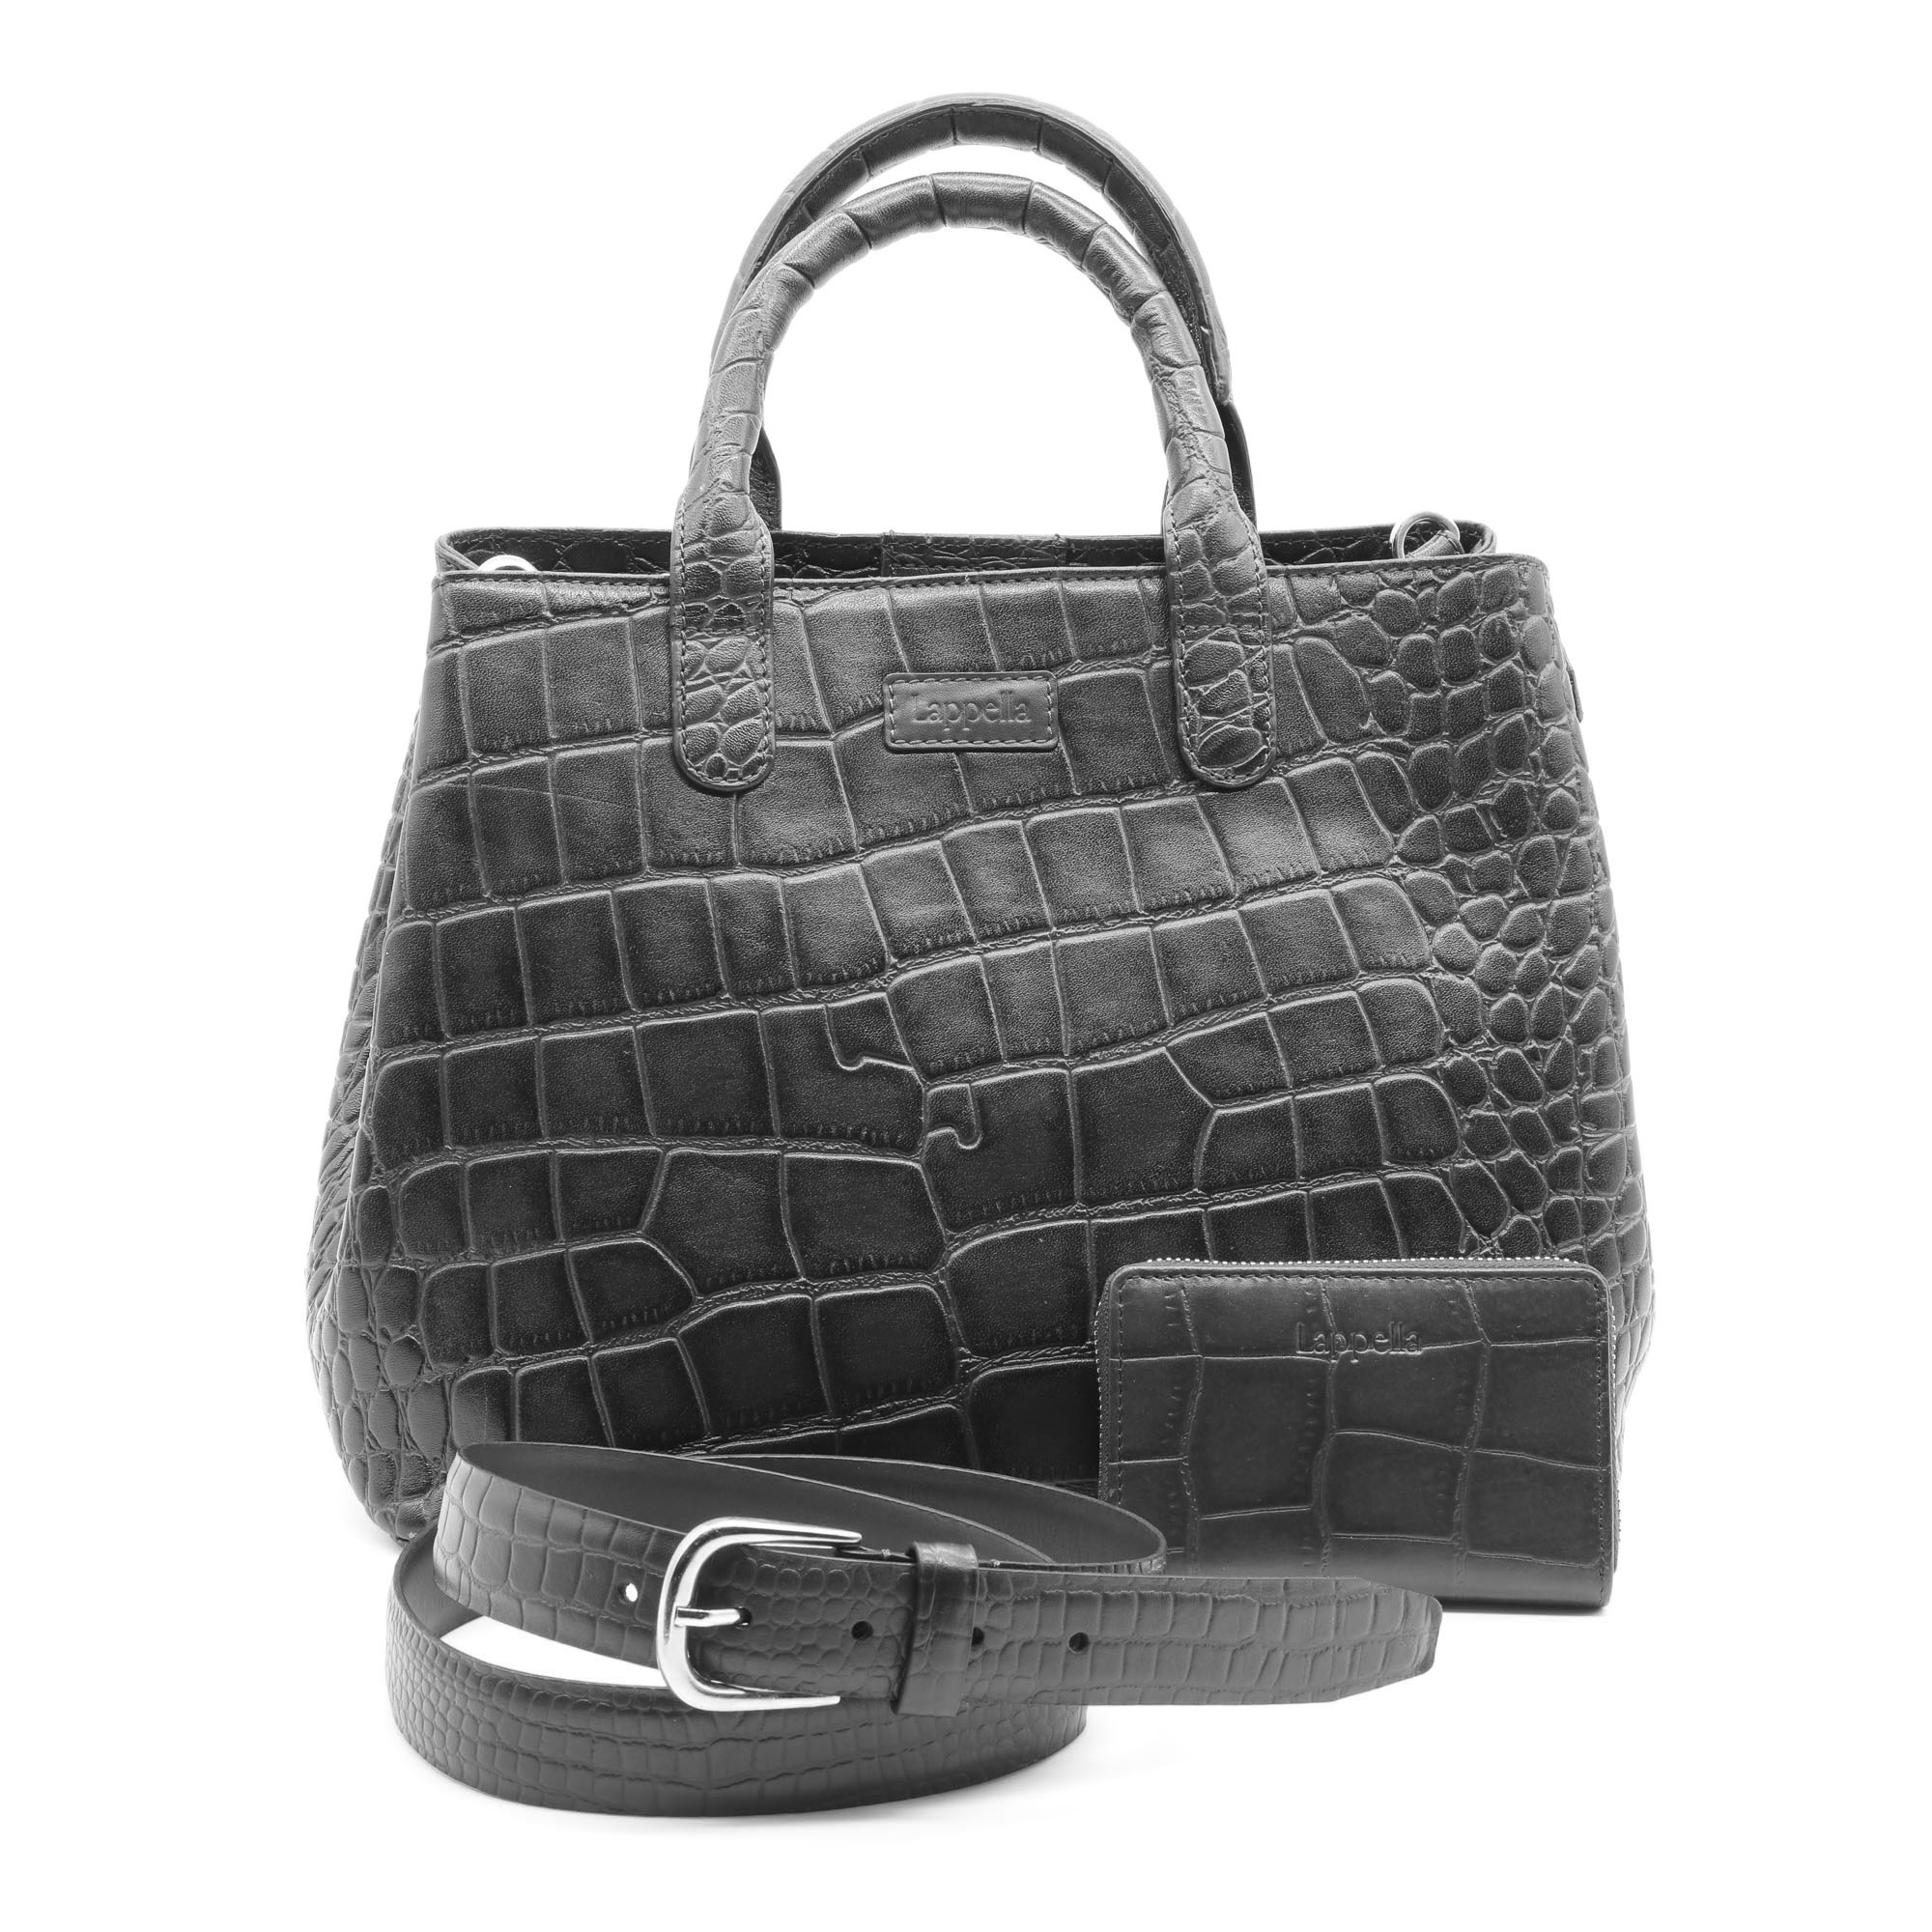 Lappella luxury soft croc leather Thea tote, Elisia purse and Mila belt in navy.